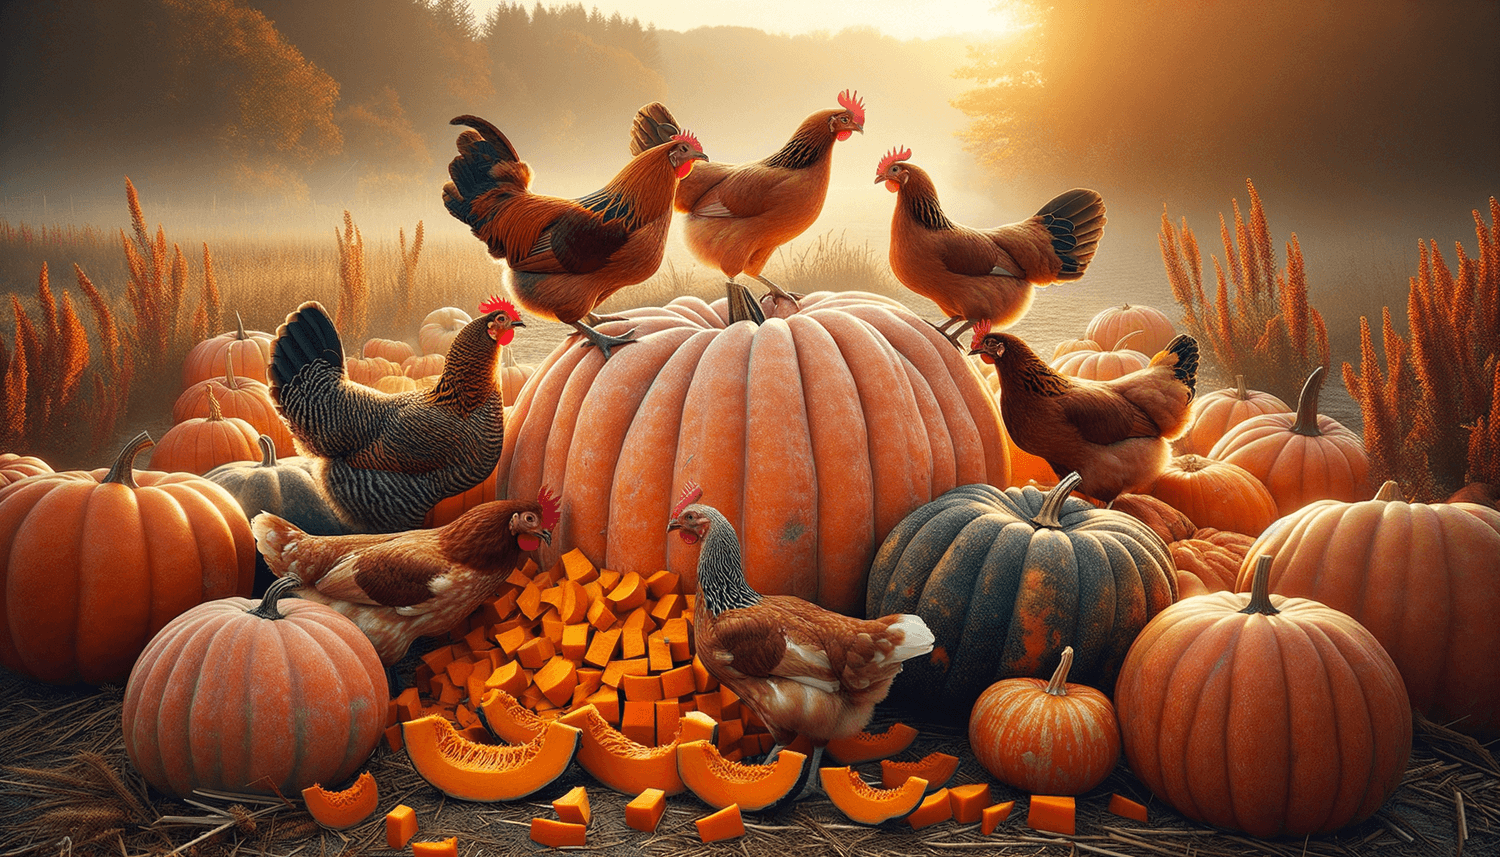 Can Chickens Eat Pumpkins?